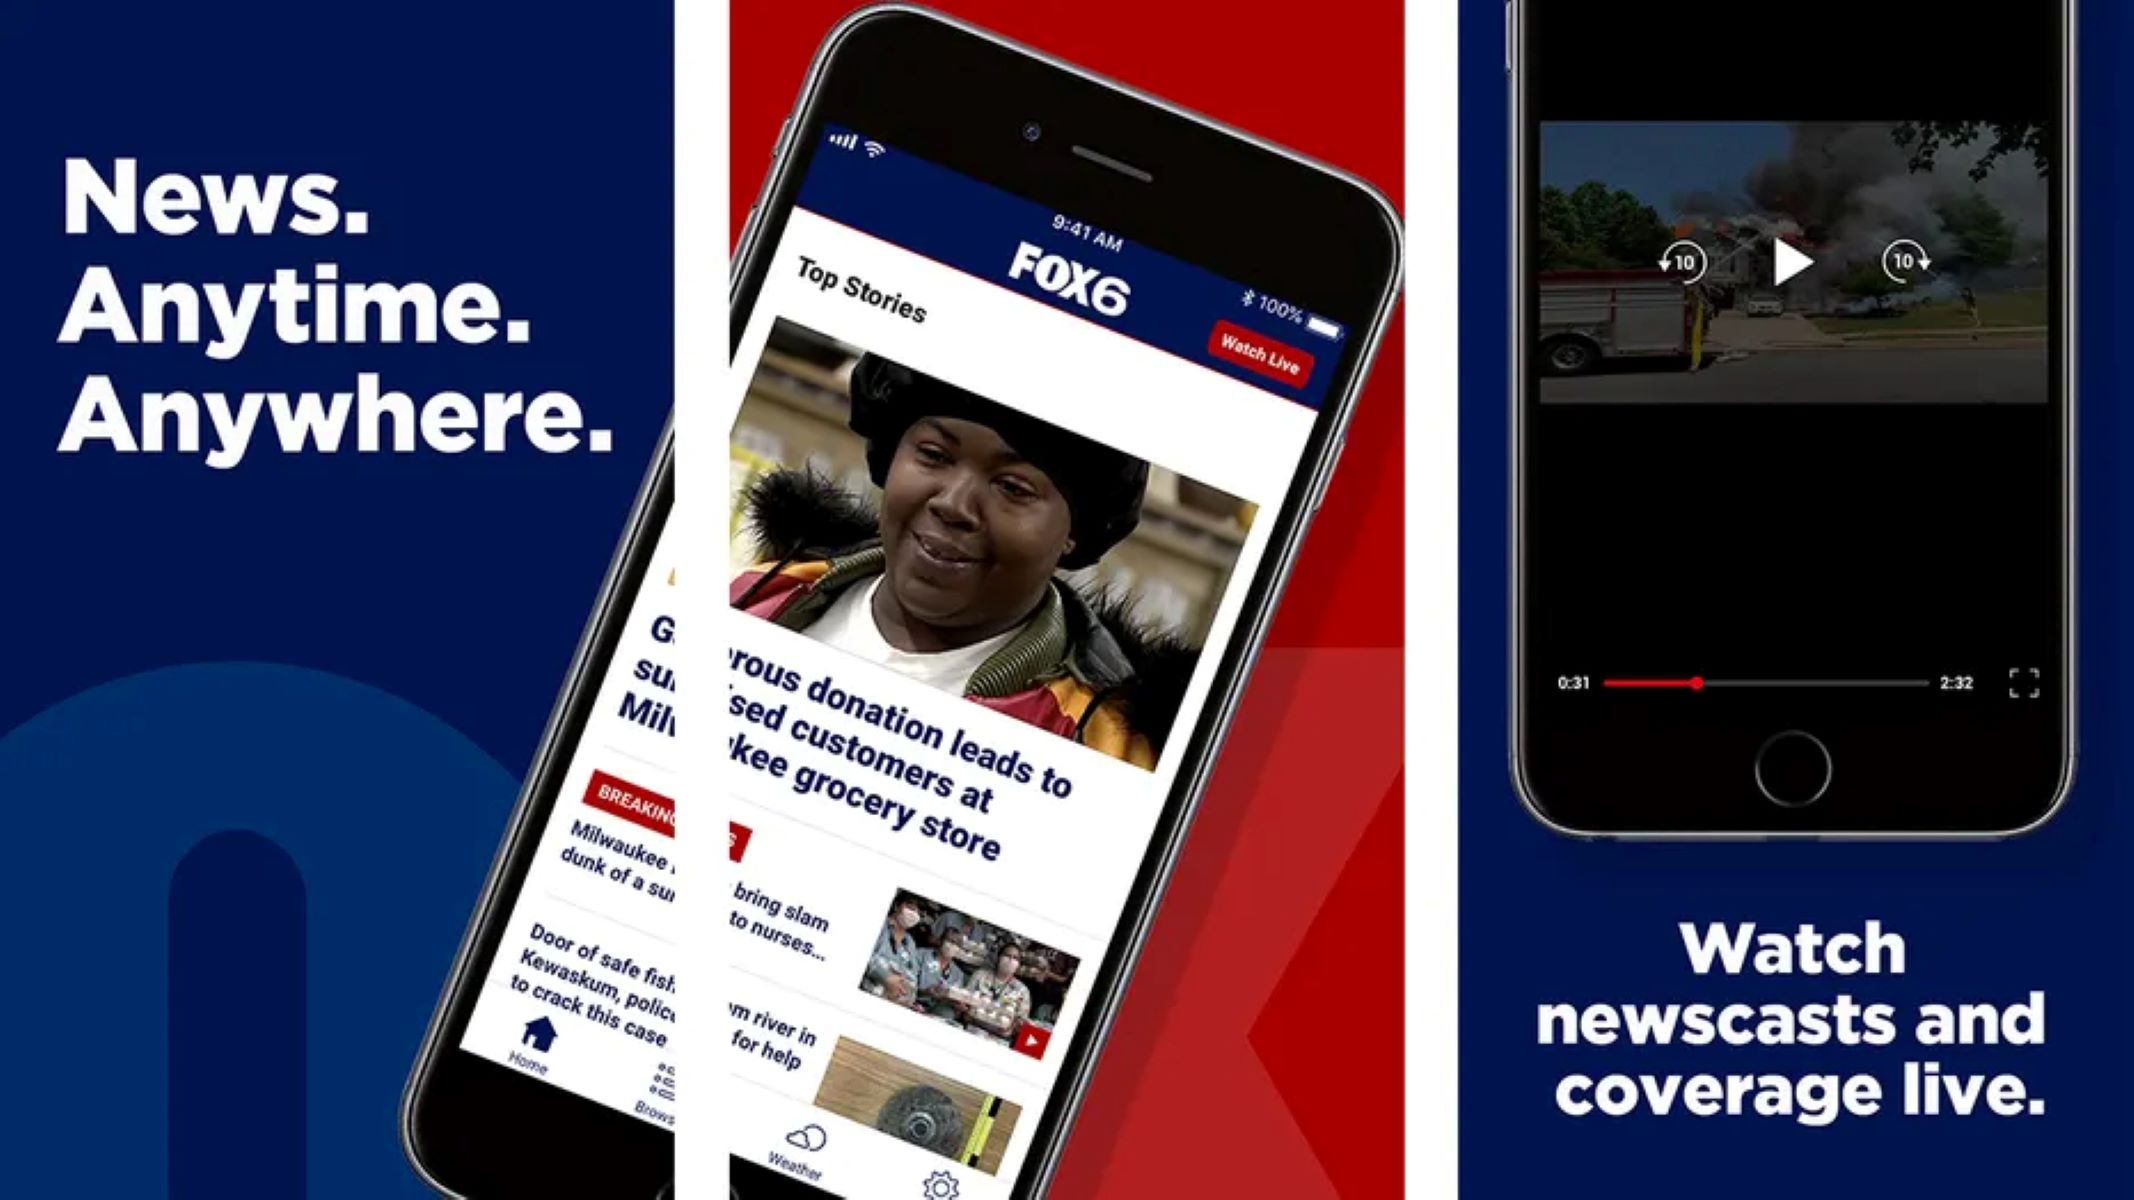 How To Watch Fox Live On IPhone